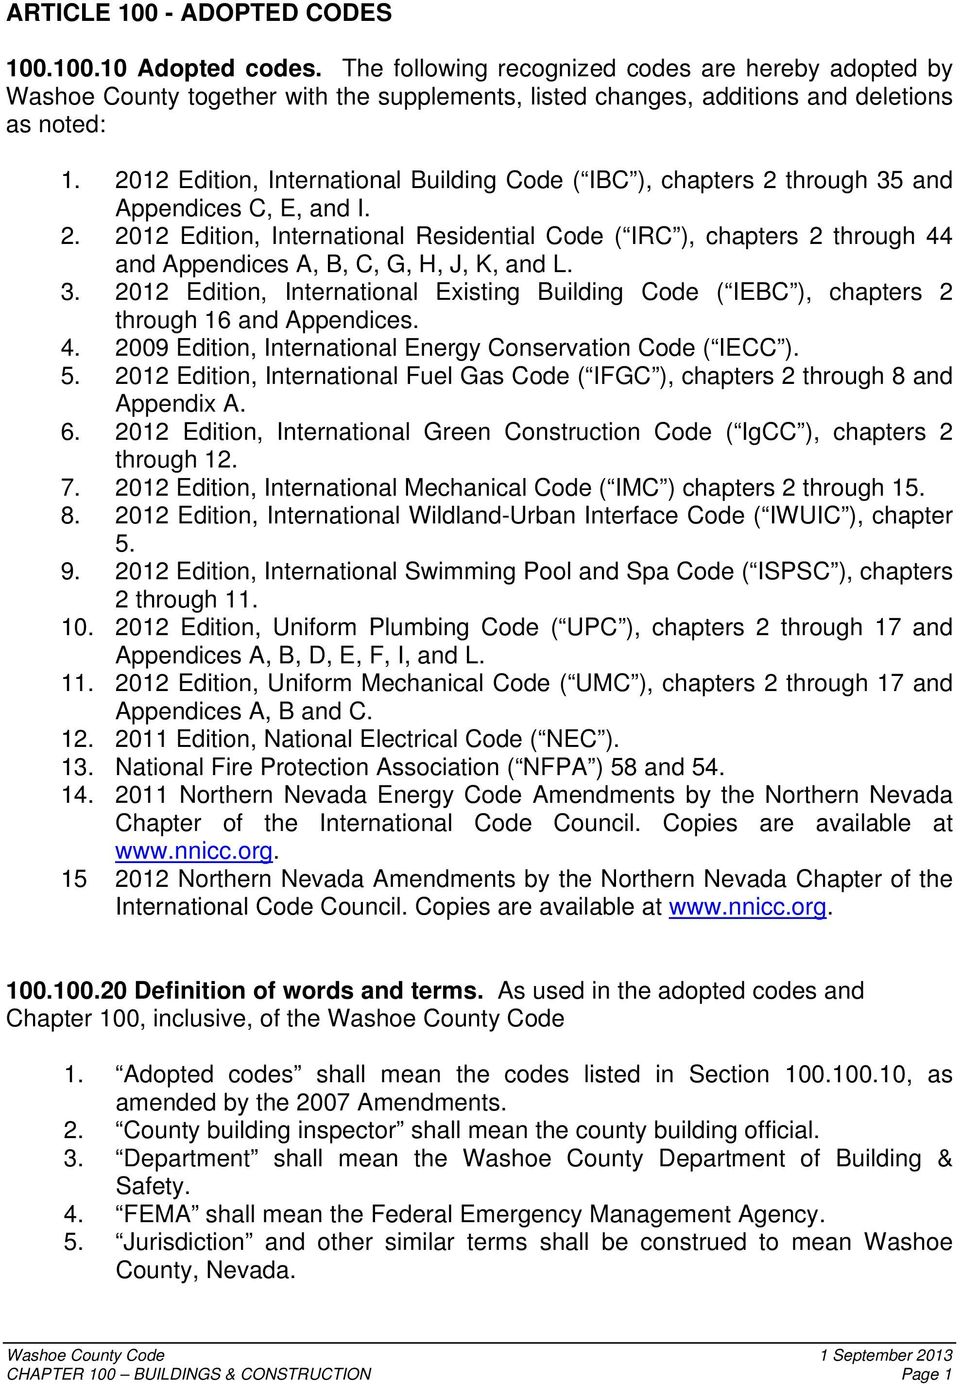 2012 Edition, International Building Code ( IBC ), chapters 2 through 35 and Appendices C, E, and I. 2. 2012 Edition, International Residential Code ( IRC ), chapters 2 through 44 and Appendices A, B, C, G, H, J, K, and L.